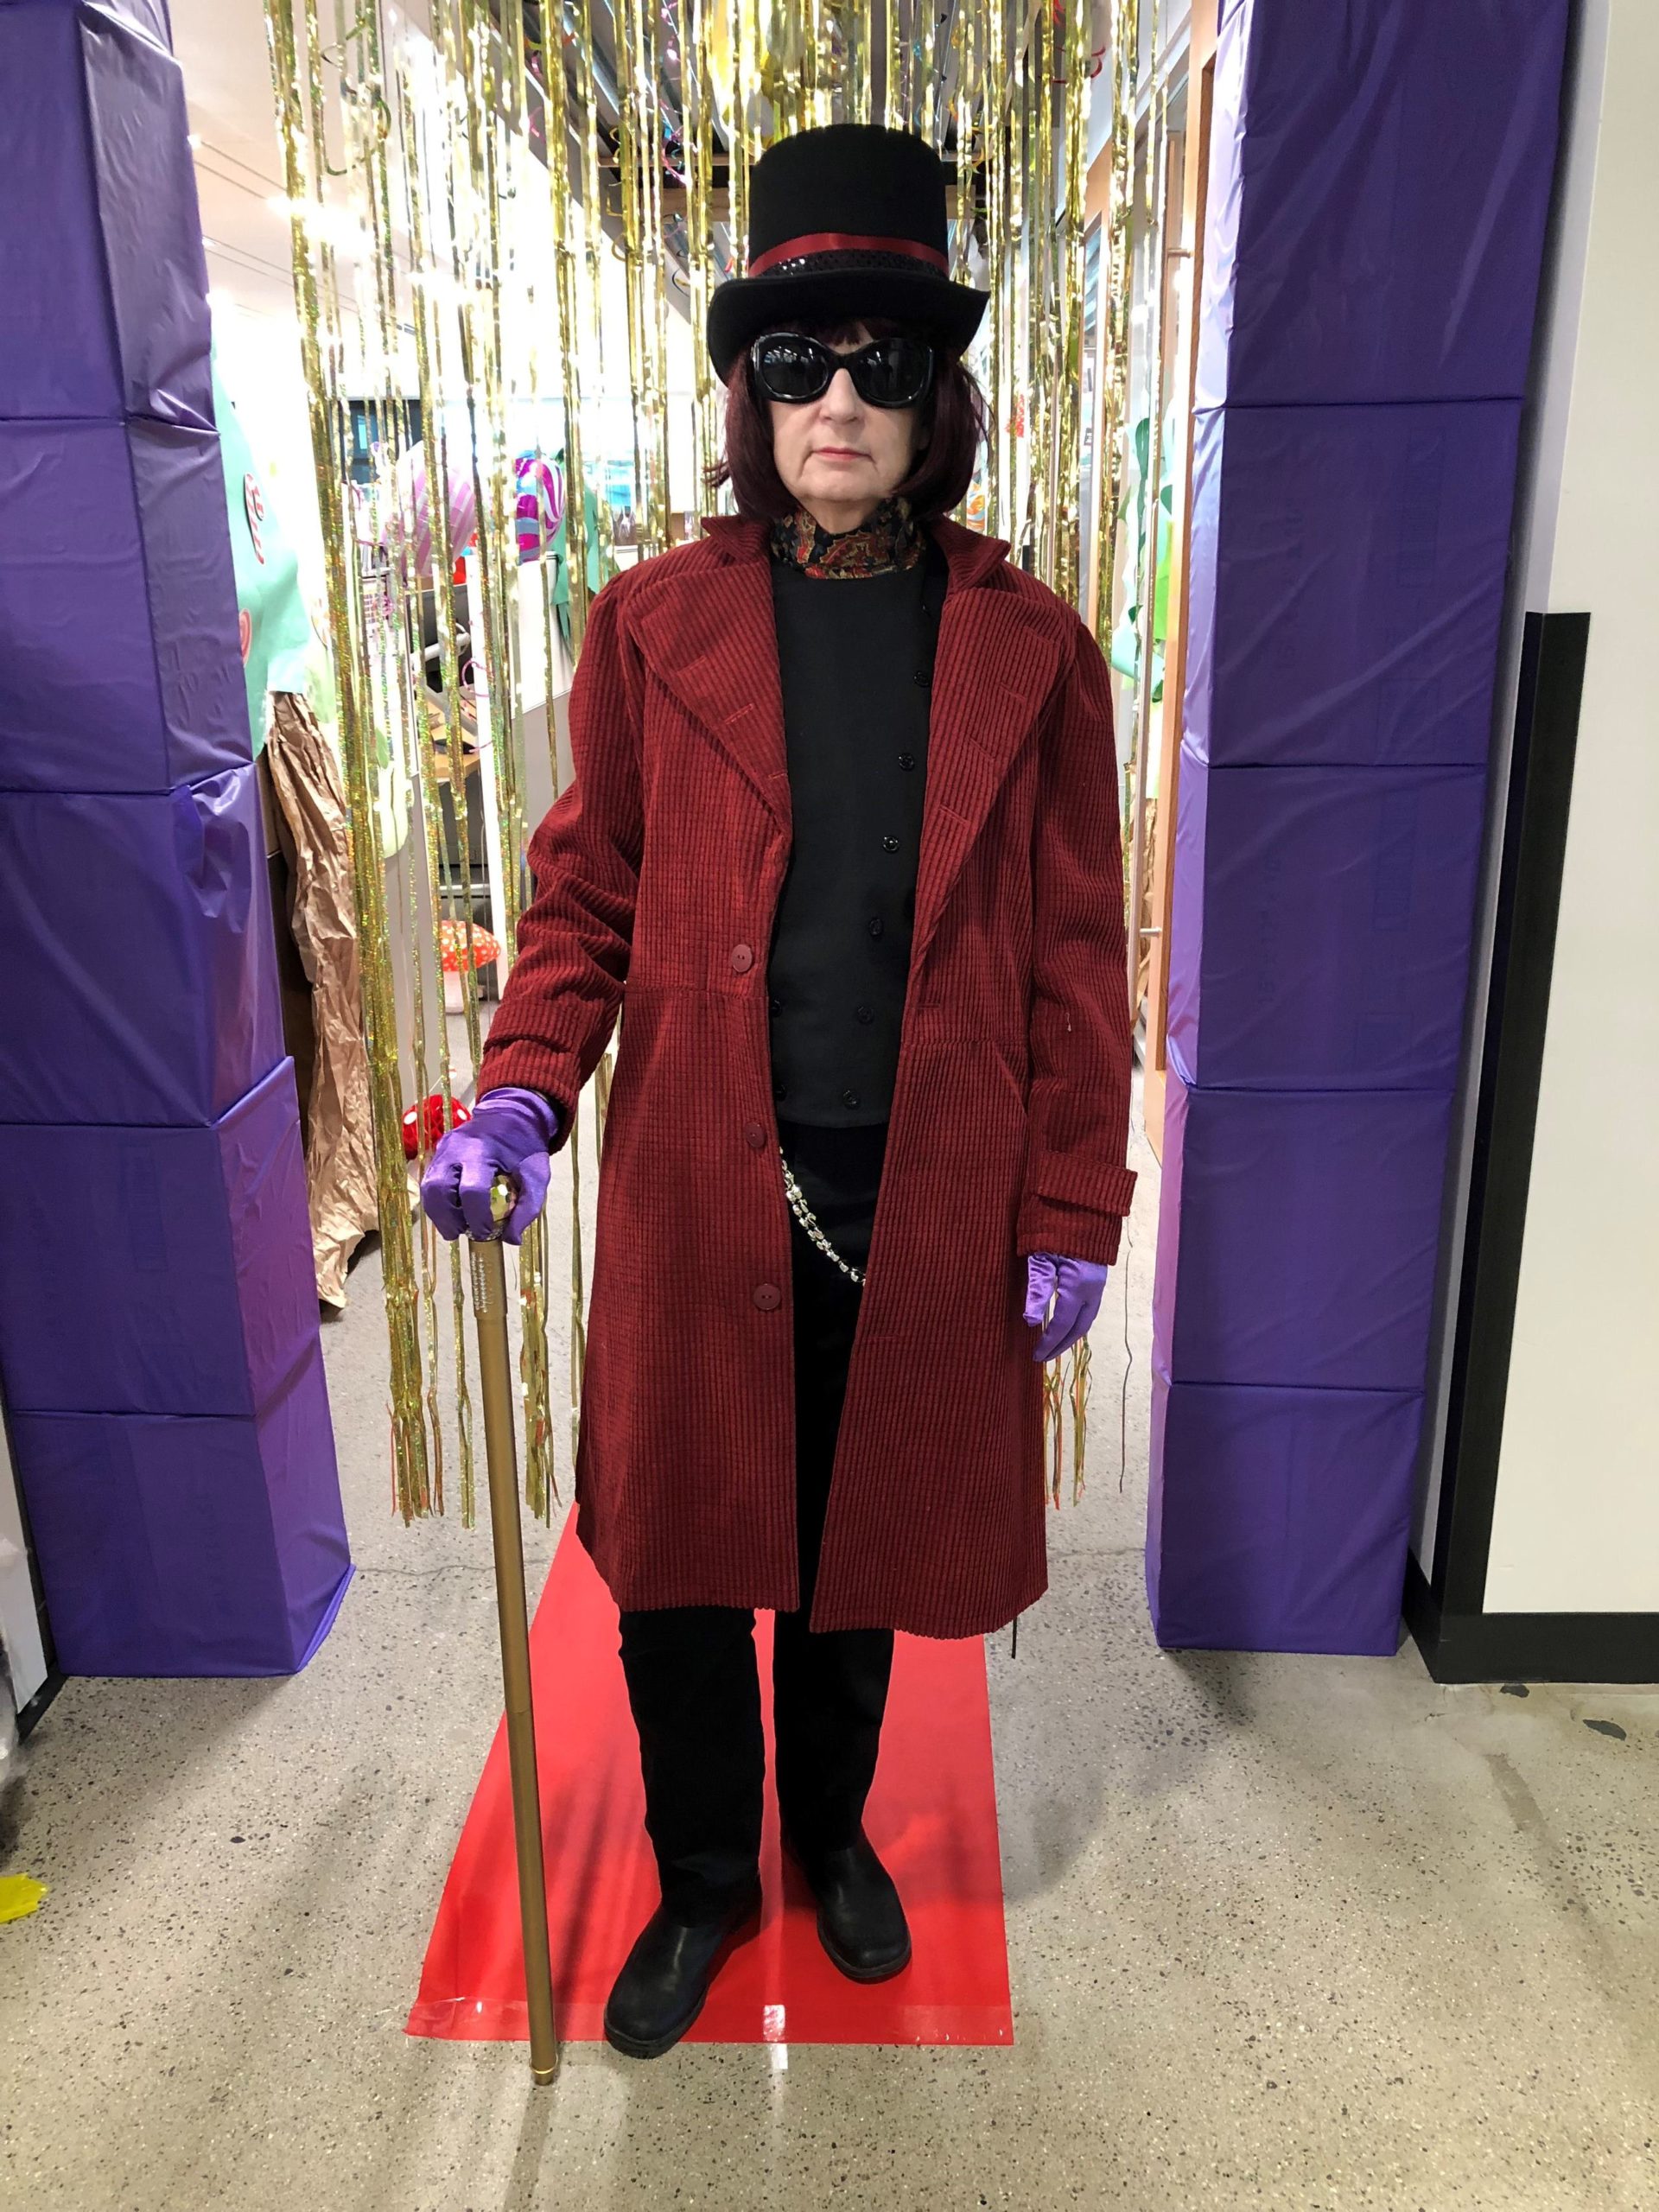 Extra Space Storage's Lisa Smith in homemade Willy Wonka Halloween costume